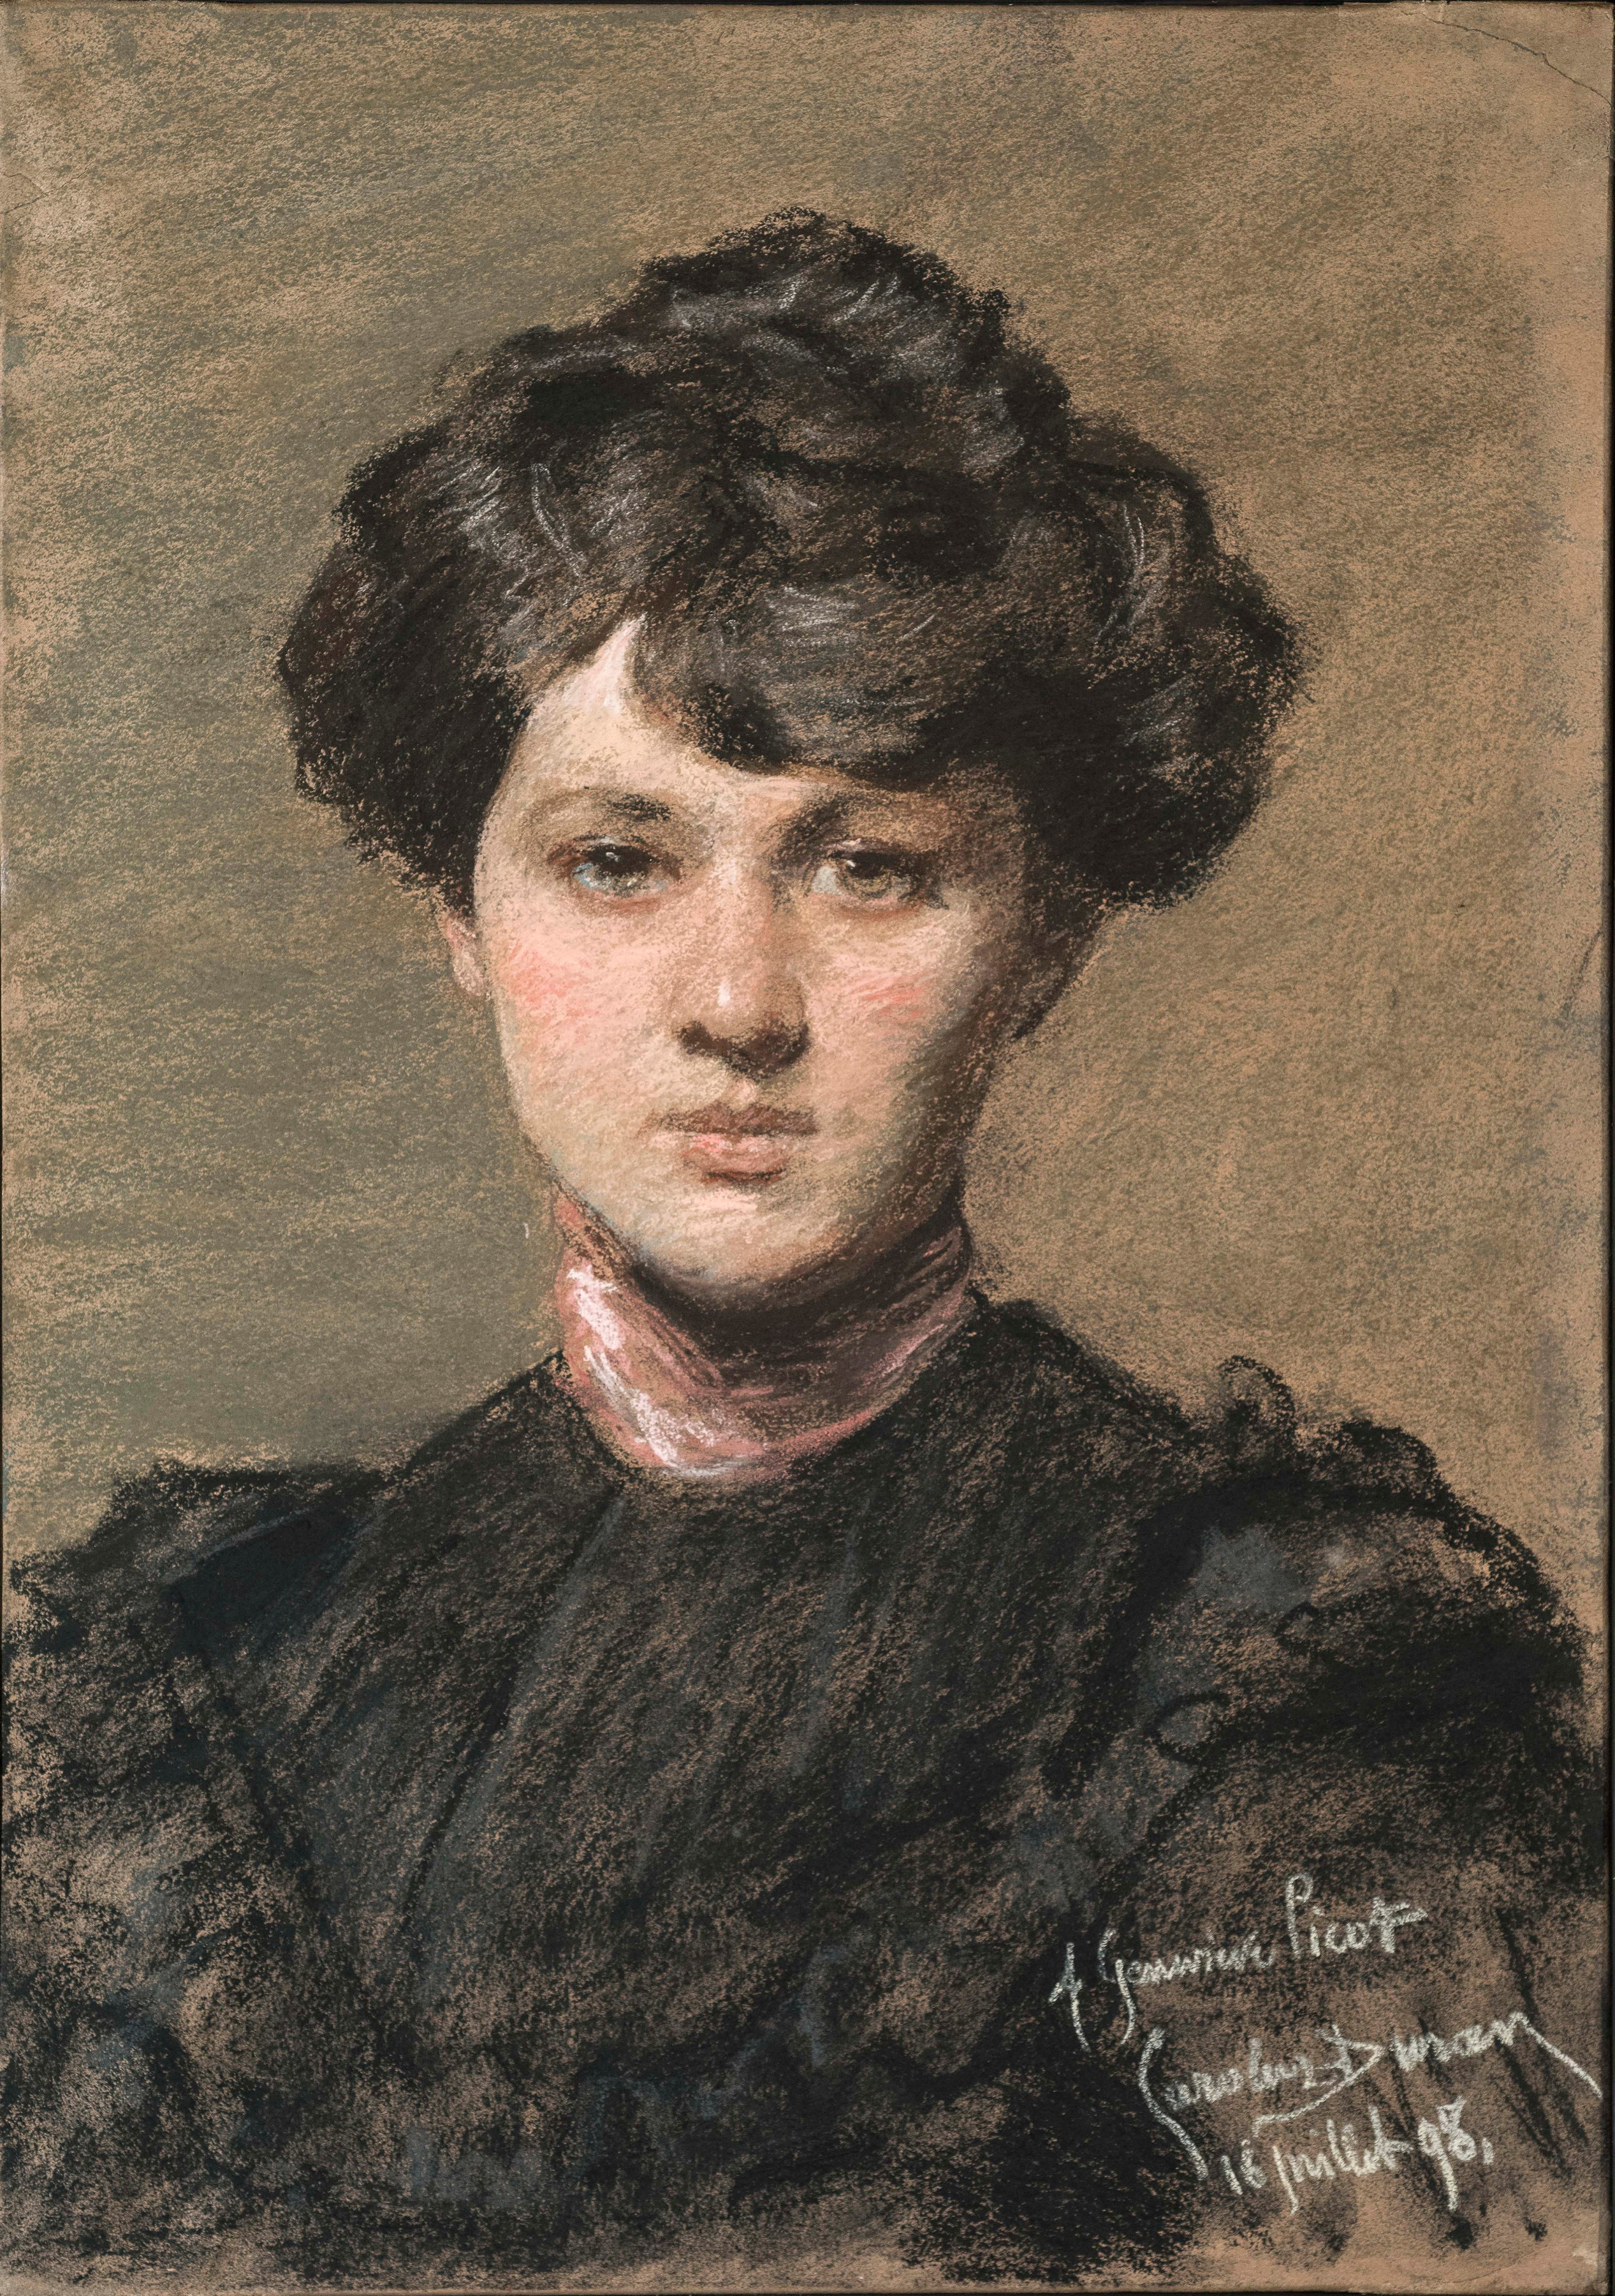 Carolus-Durand, Portrait of Genevieve Picot, 1898,   Pastel on paper 21 1/4 x 15 5/8 inches